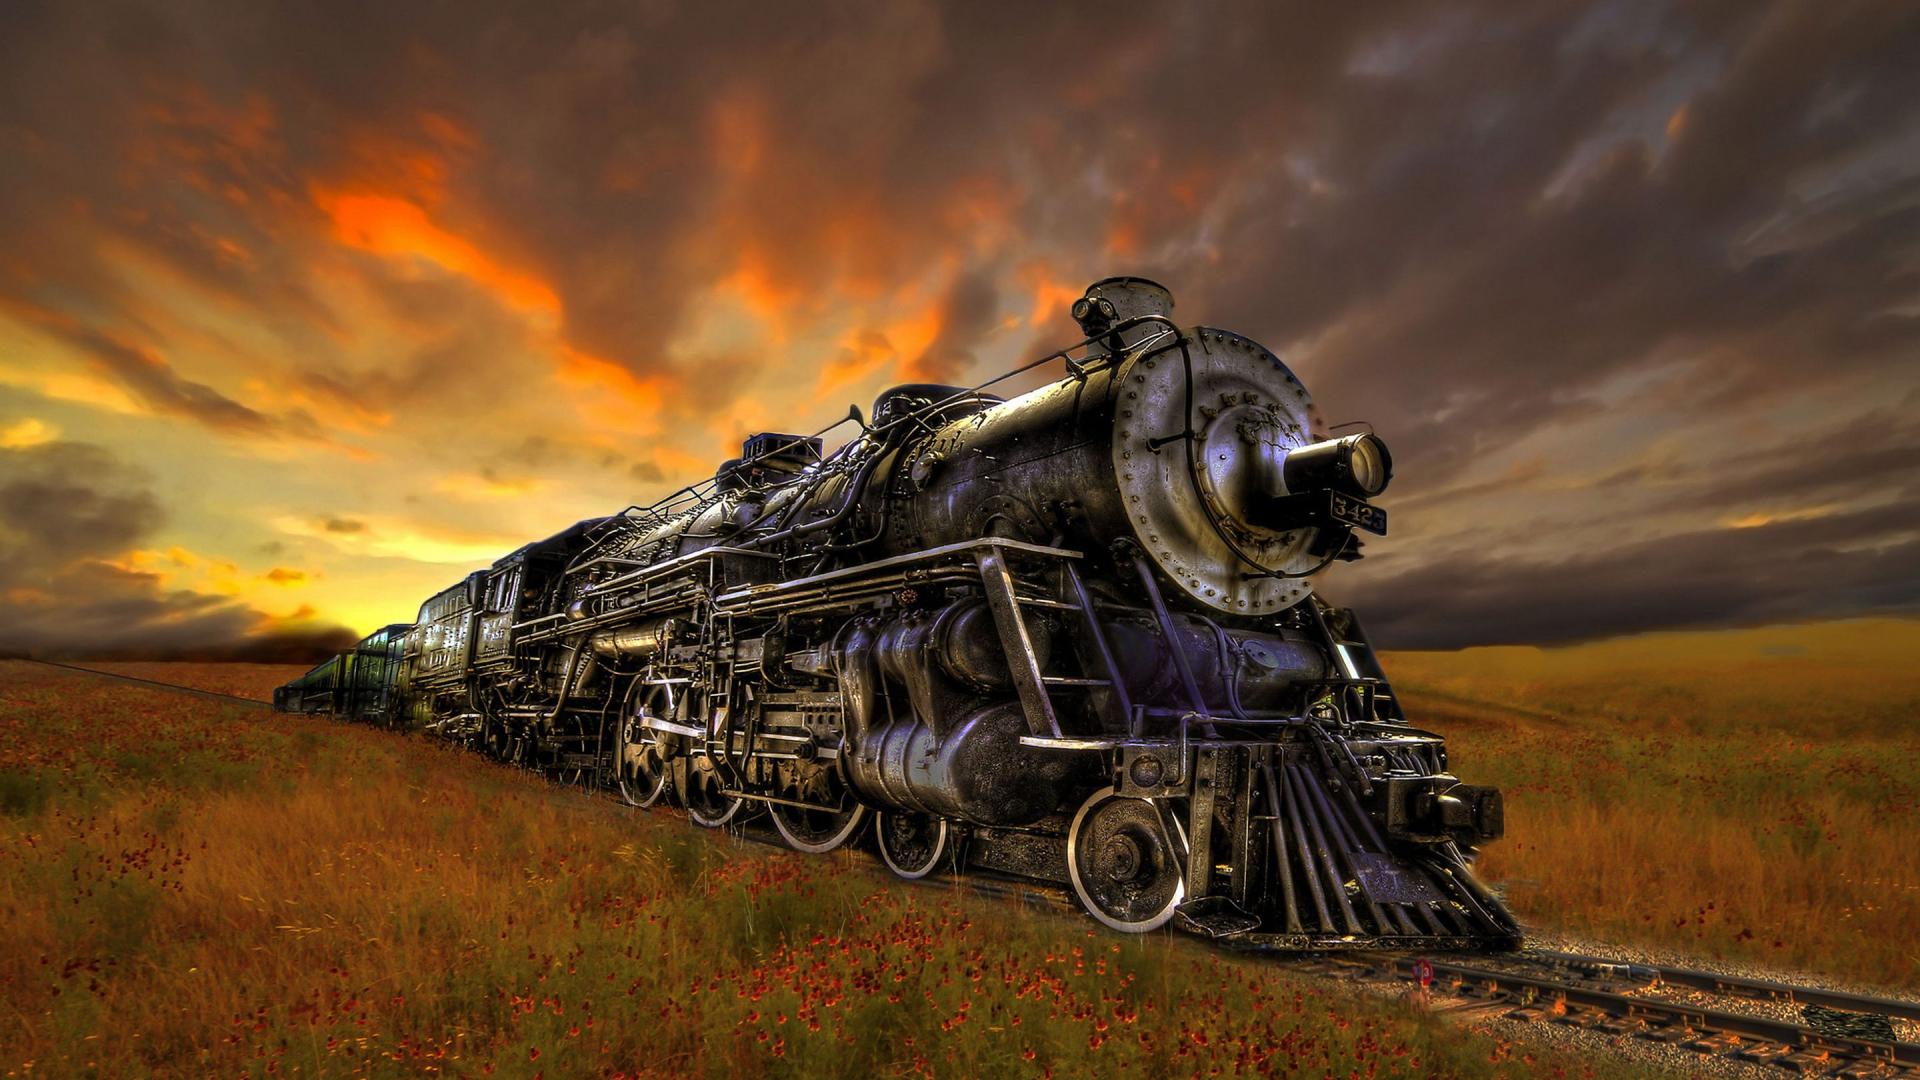 Download Steam Train Wallpaper HD pictures in high definition or